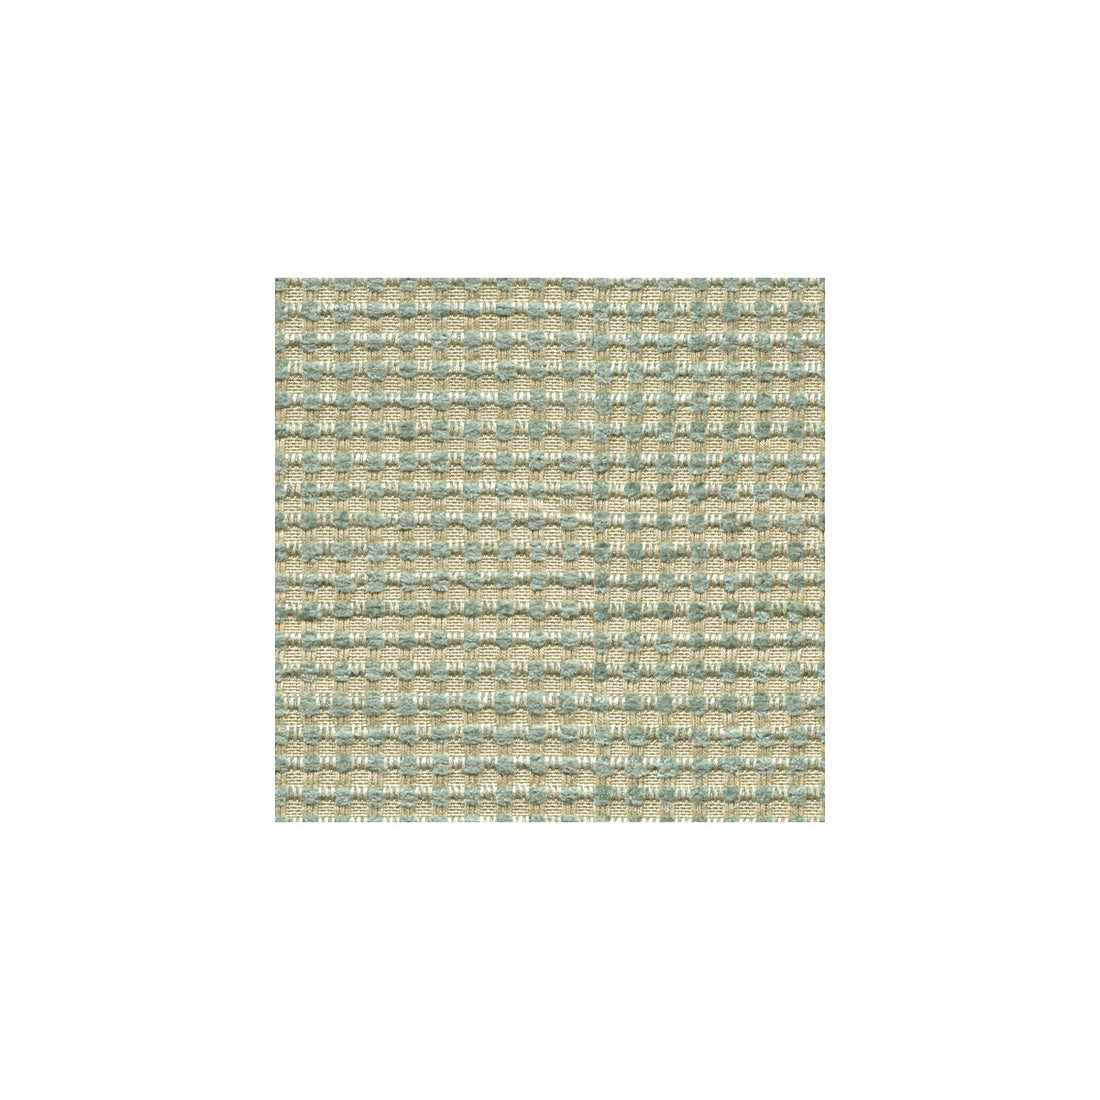 Bubble Tea fabric in calm color - pattern 32012.135.0 - by Kravet Design in the Candice Olson collection